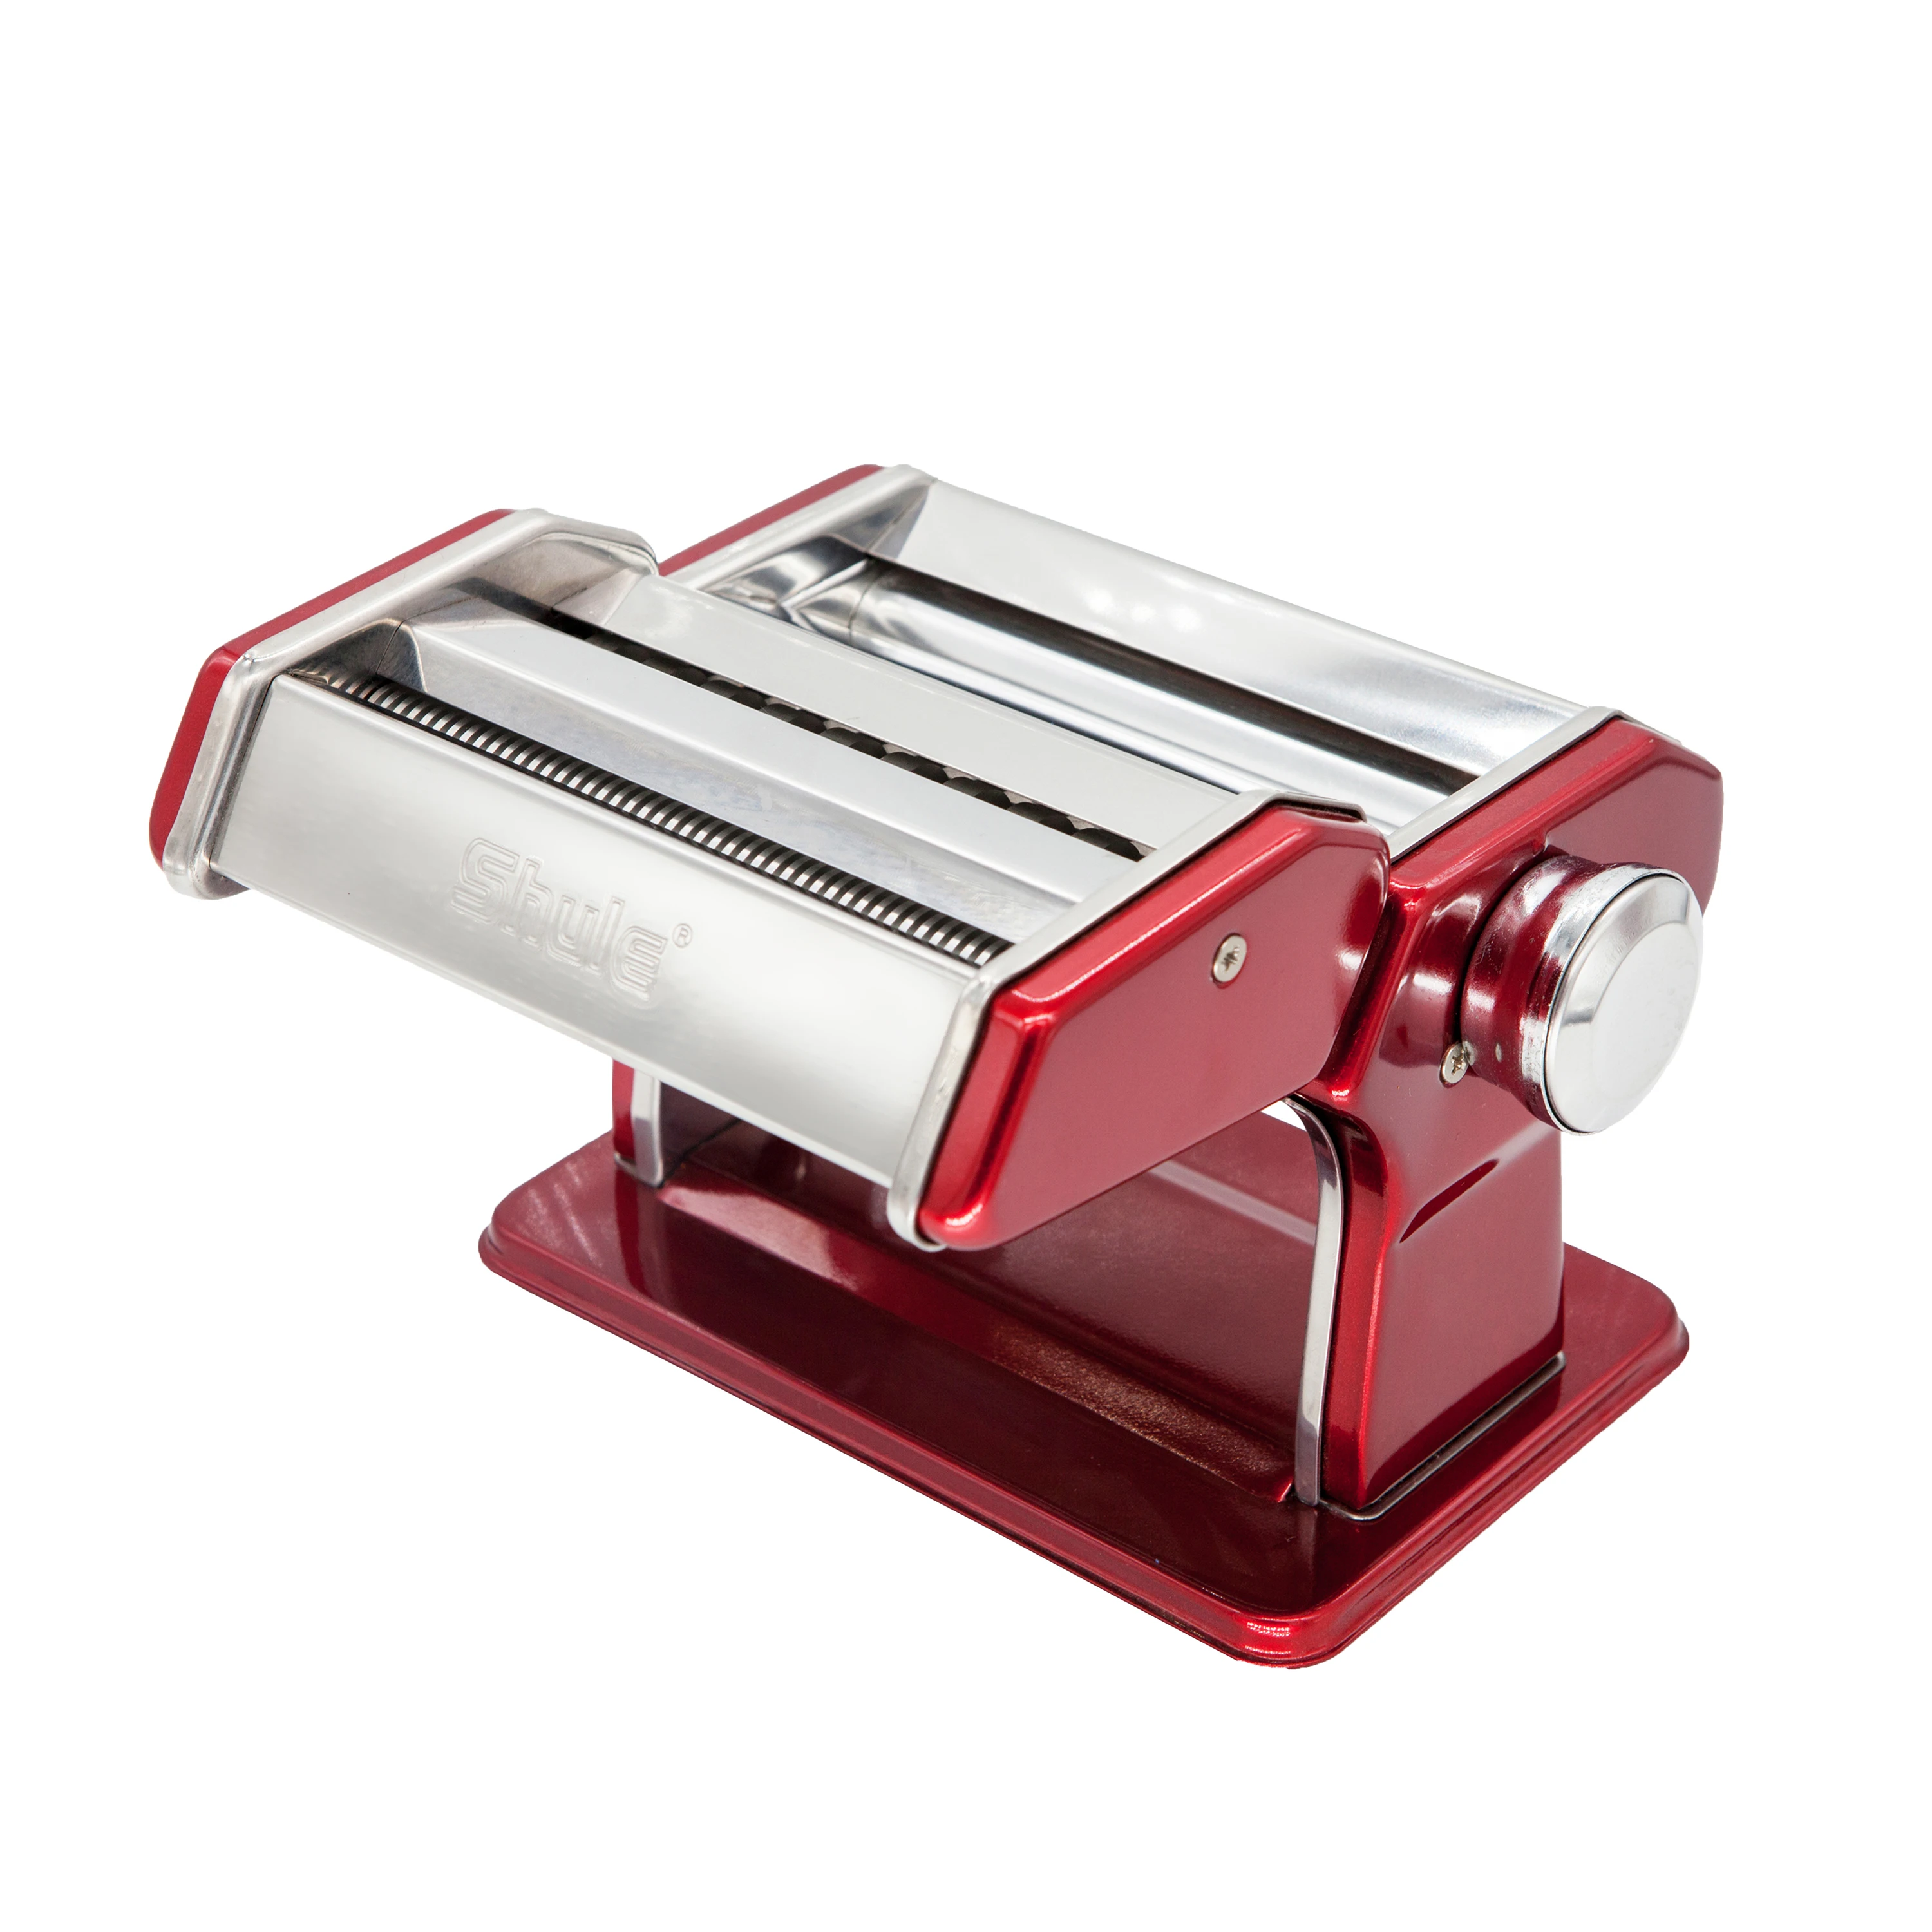 Cheap Price 180mm Pasta Noodle Machine At Home - Buy Pasta Noodle Machine,Italian Machine Product on Alibaba.com